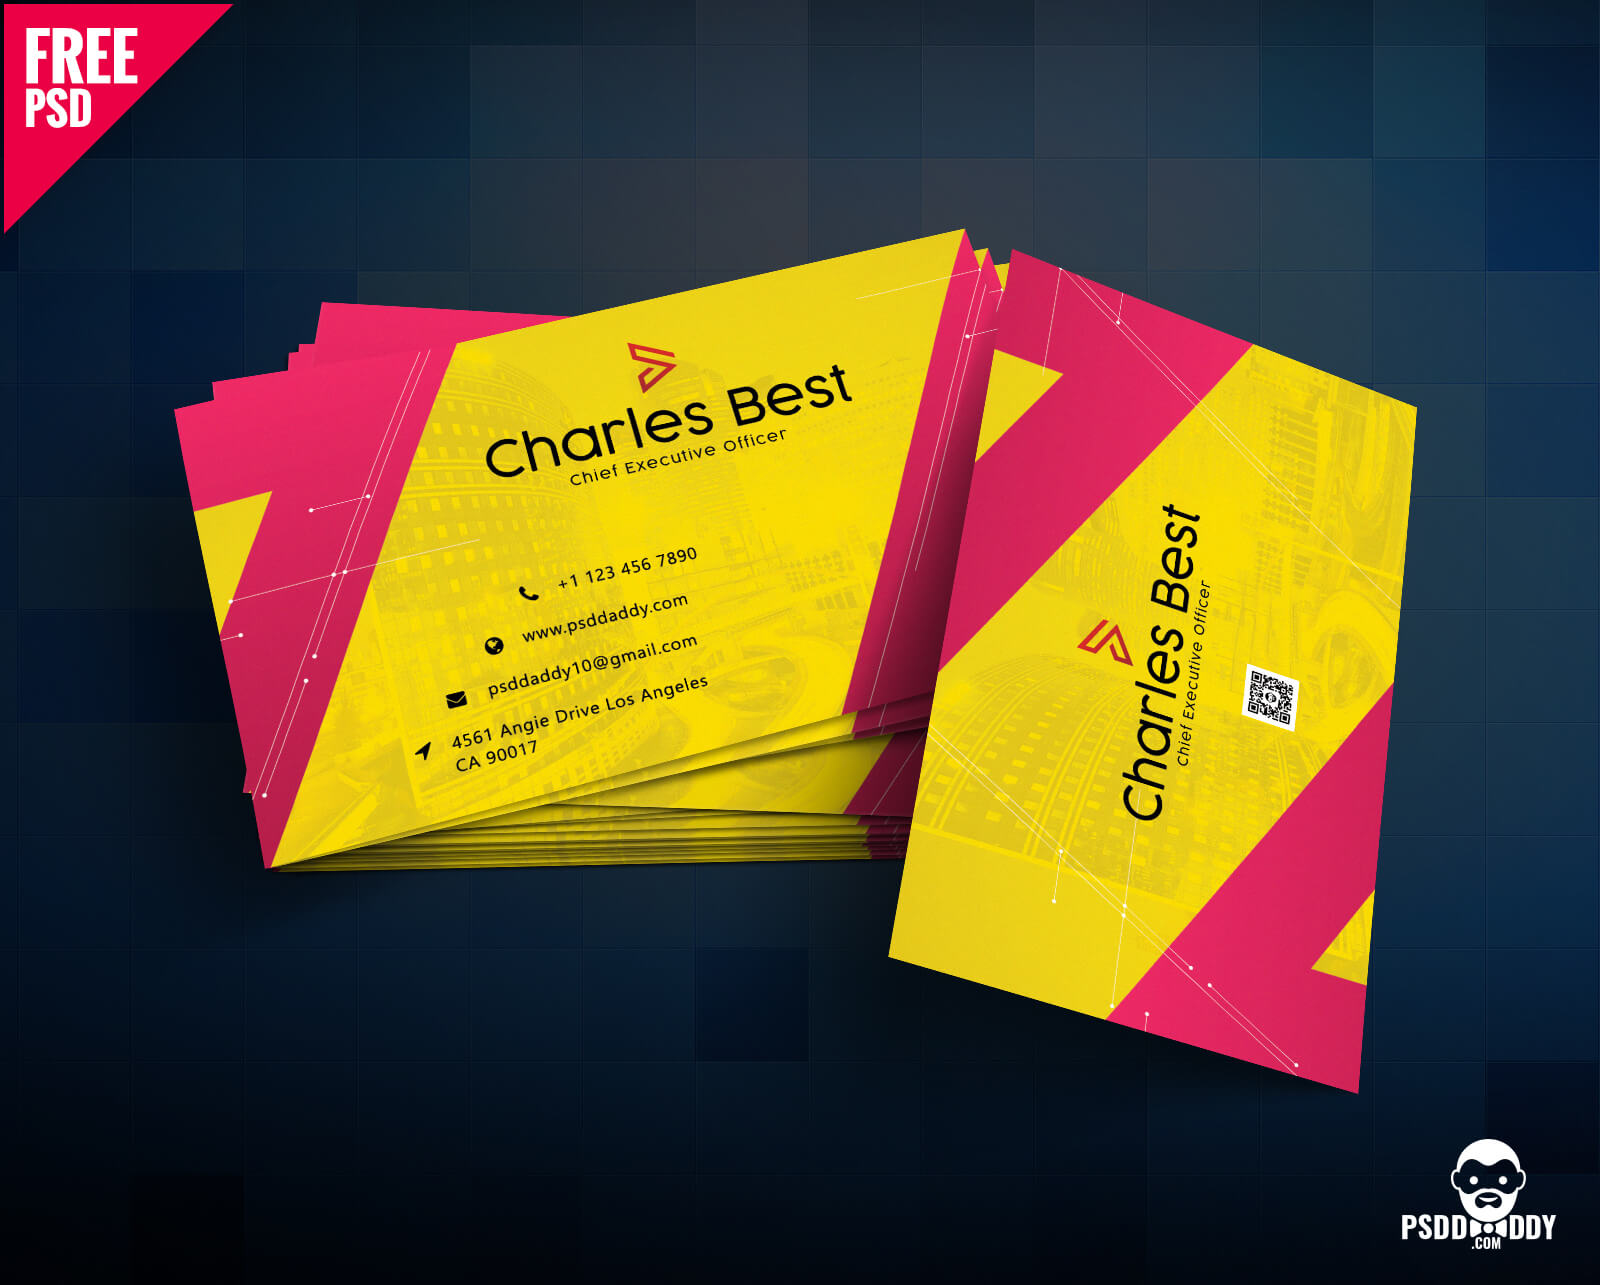 Download] Creative Business Card Free Psd | Psddaddy With Calling Card Psd Template